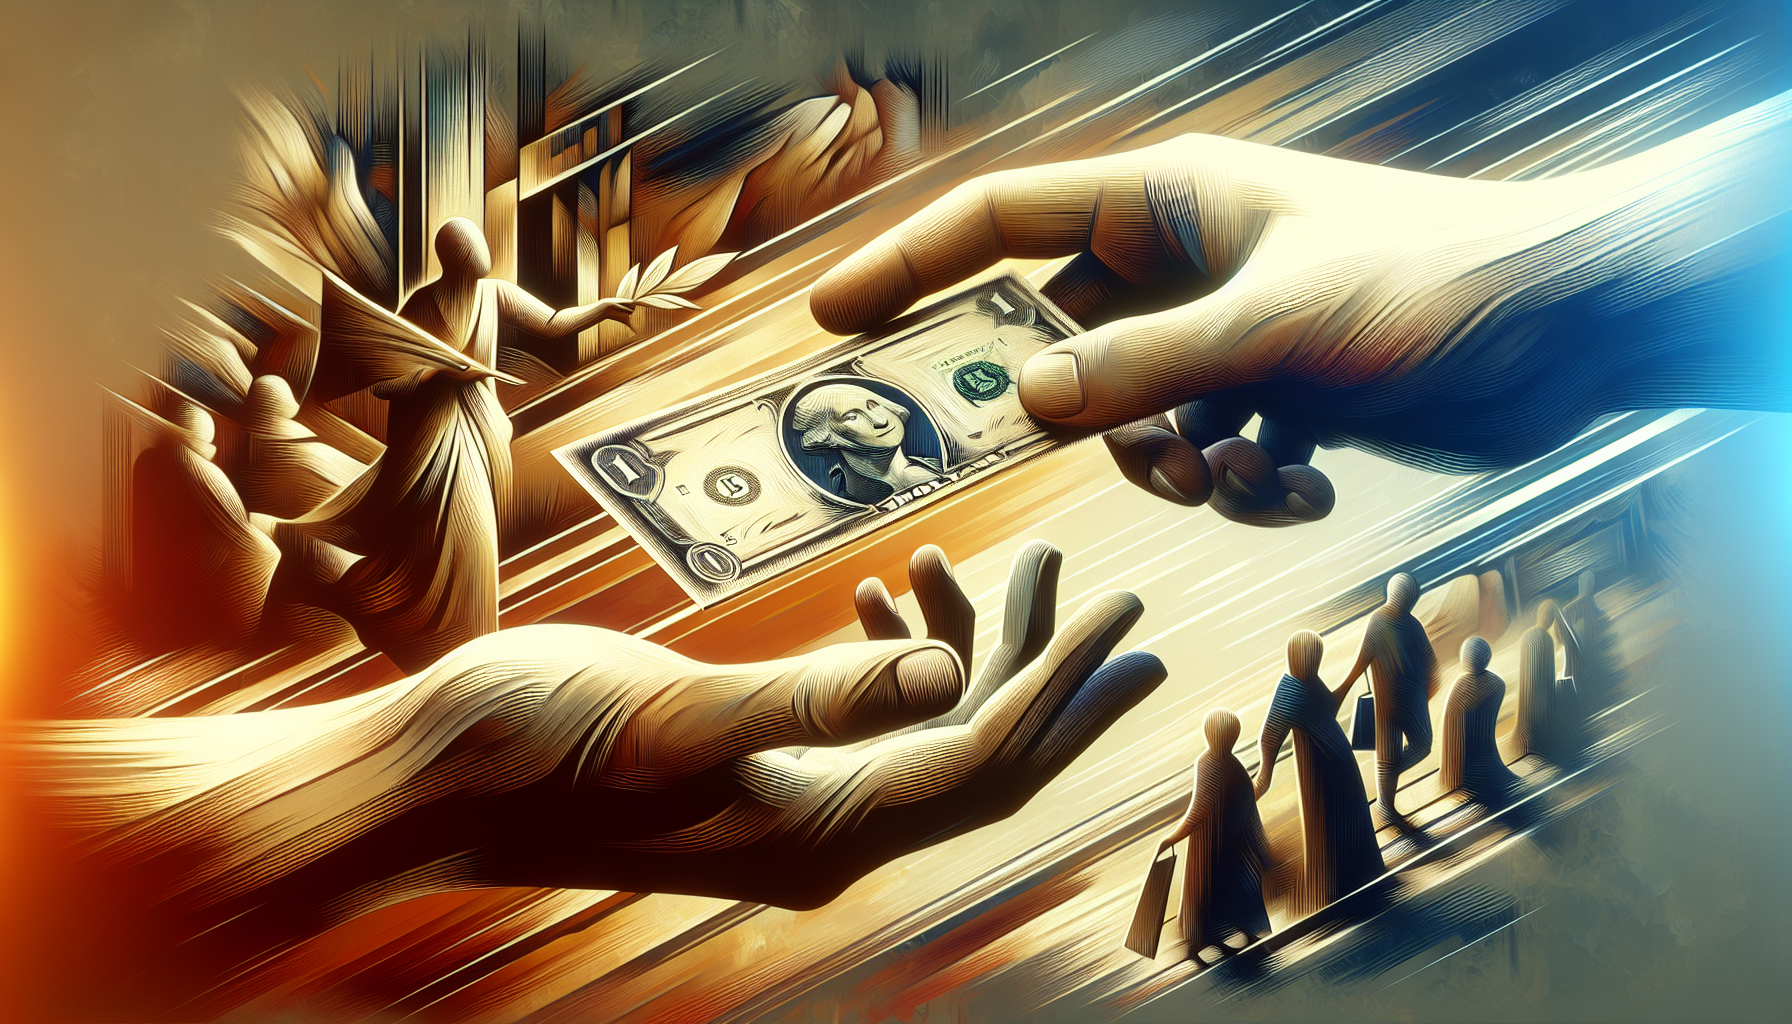 Illustration of a hand exchanging money for goods